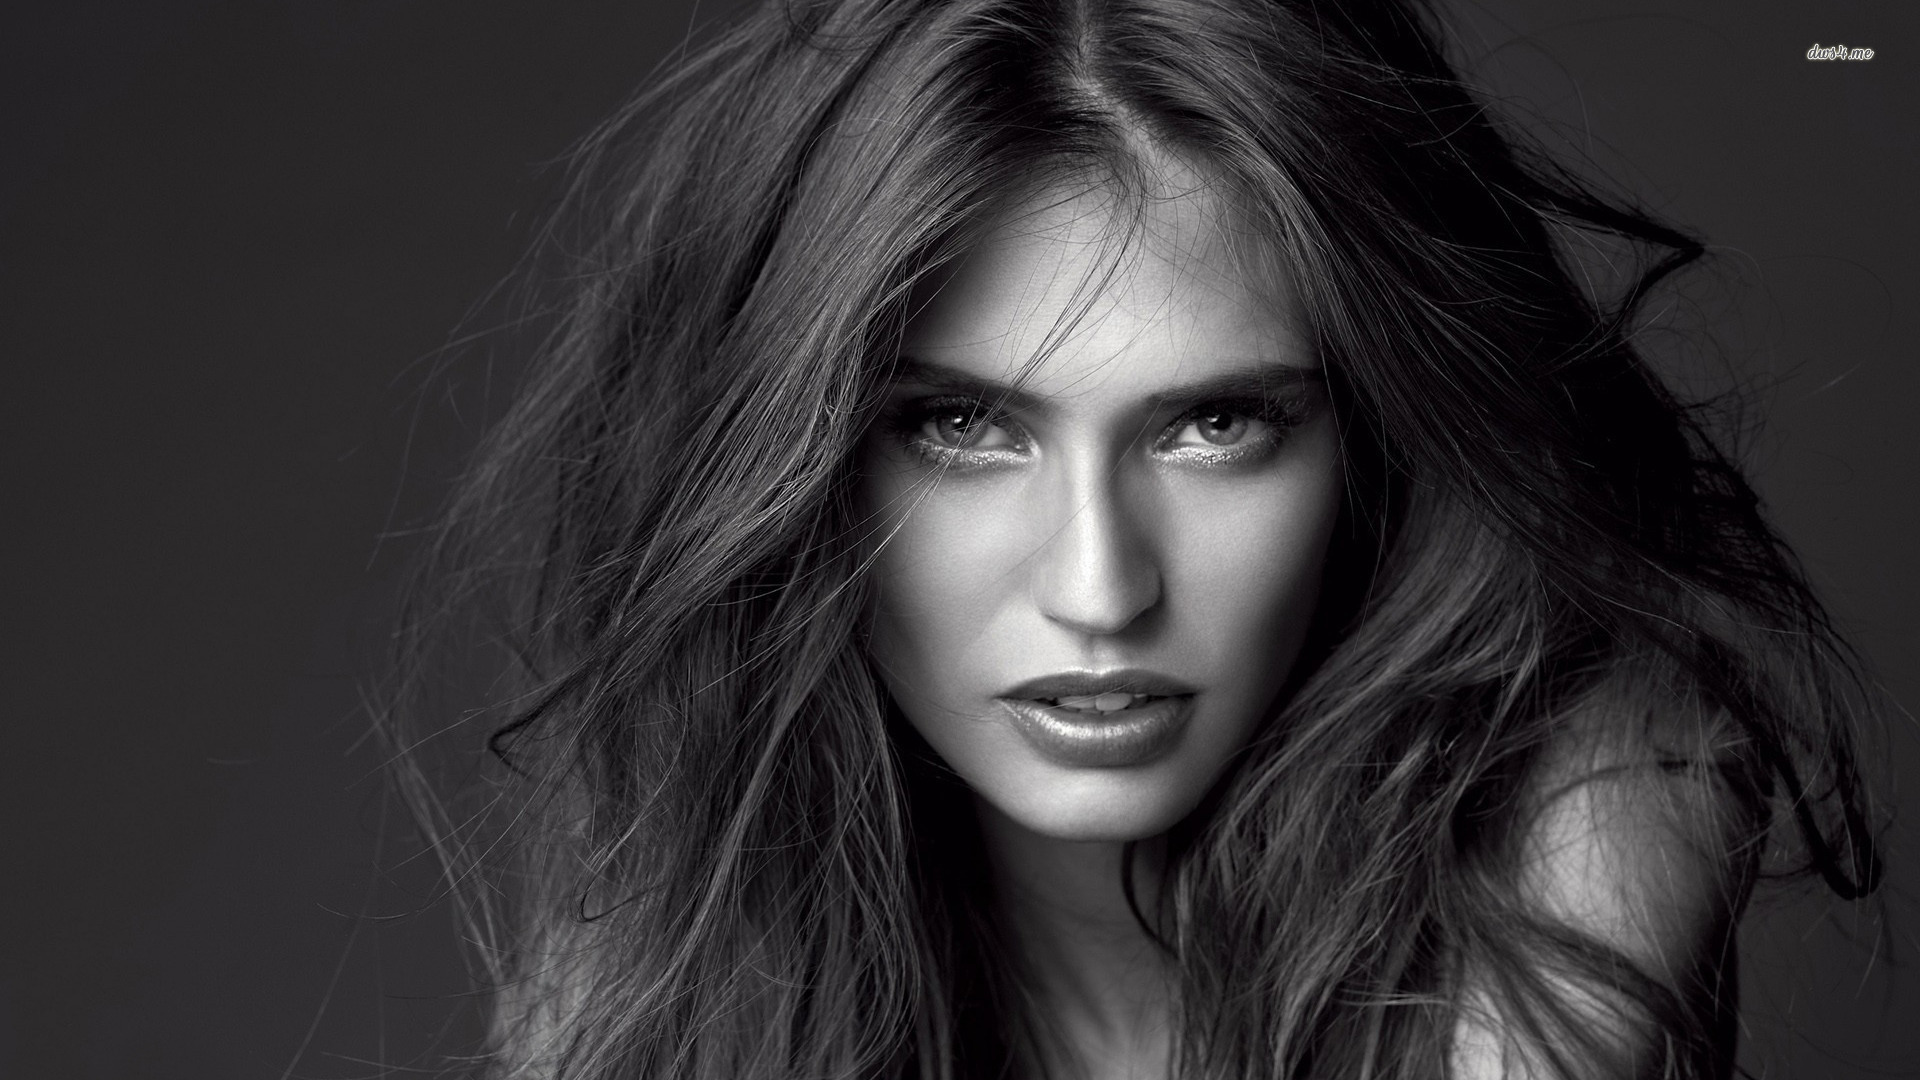 Bianca Balti Wallpapers Images Photos Pictures Backgrounds